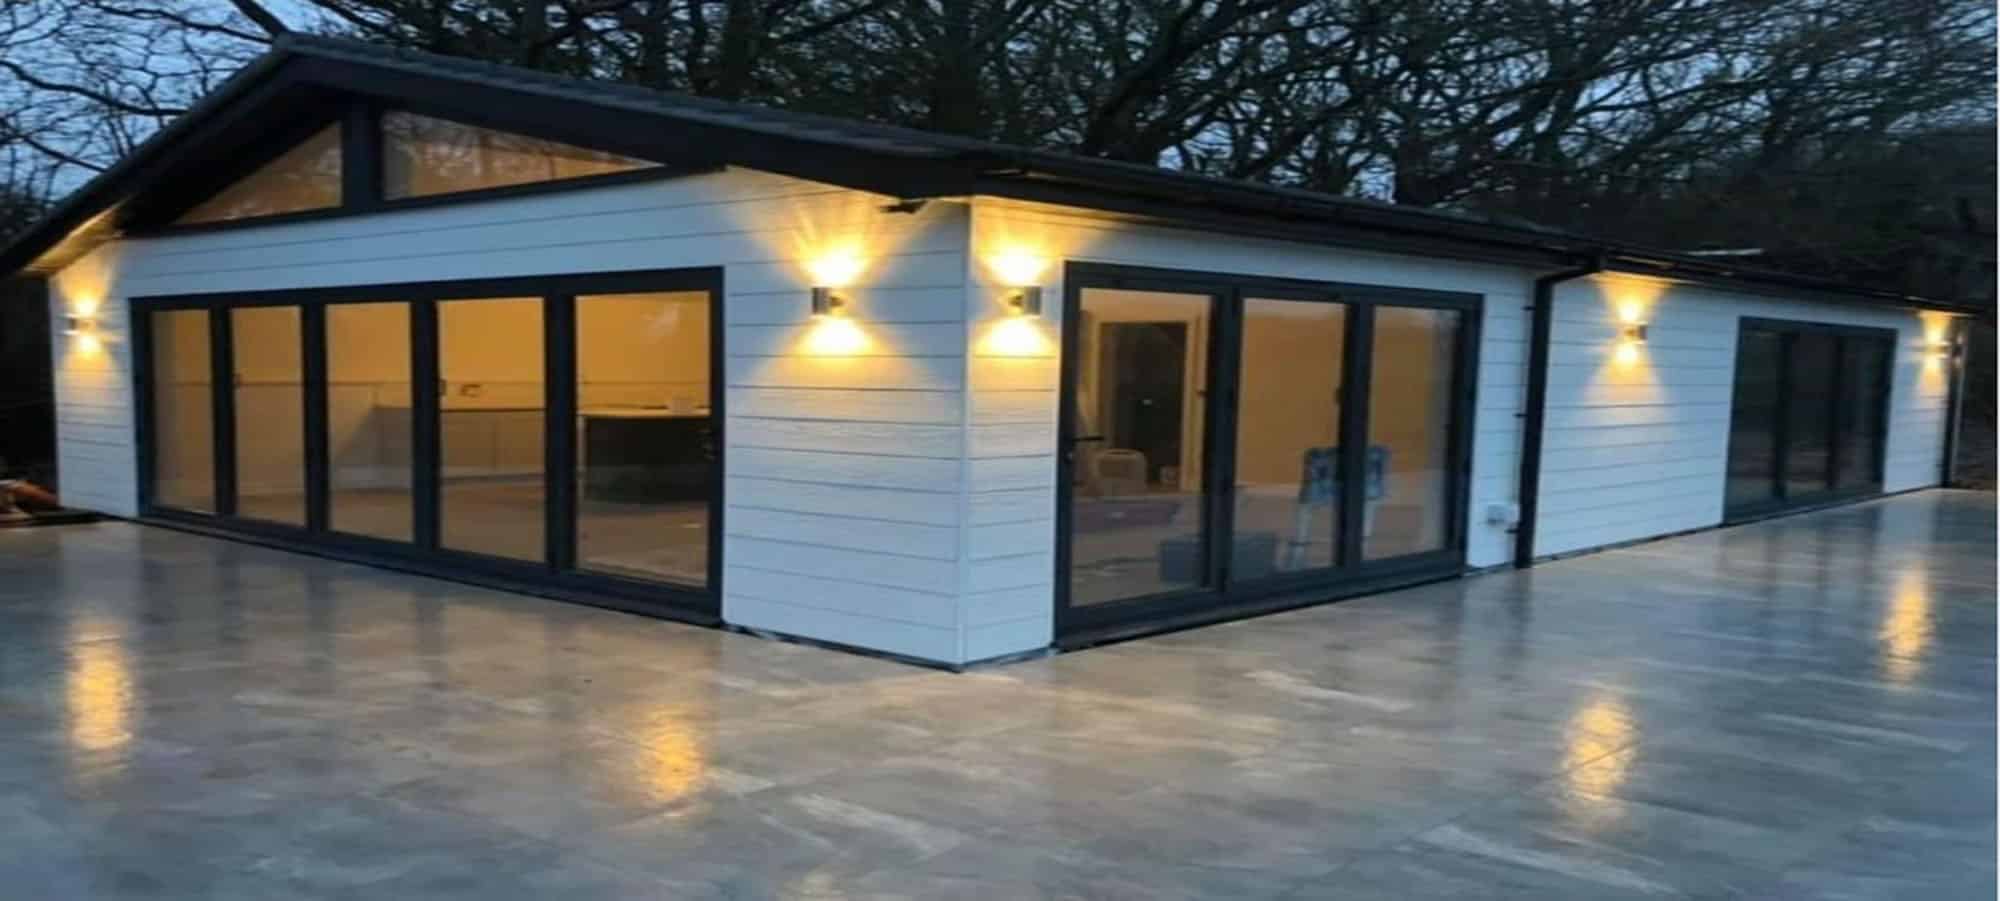 Why are bifolds great for winter?